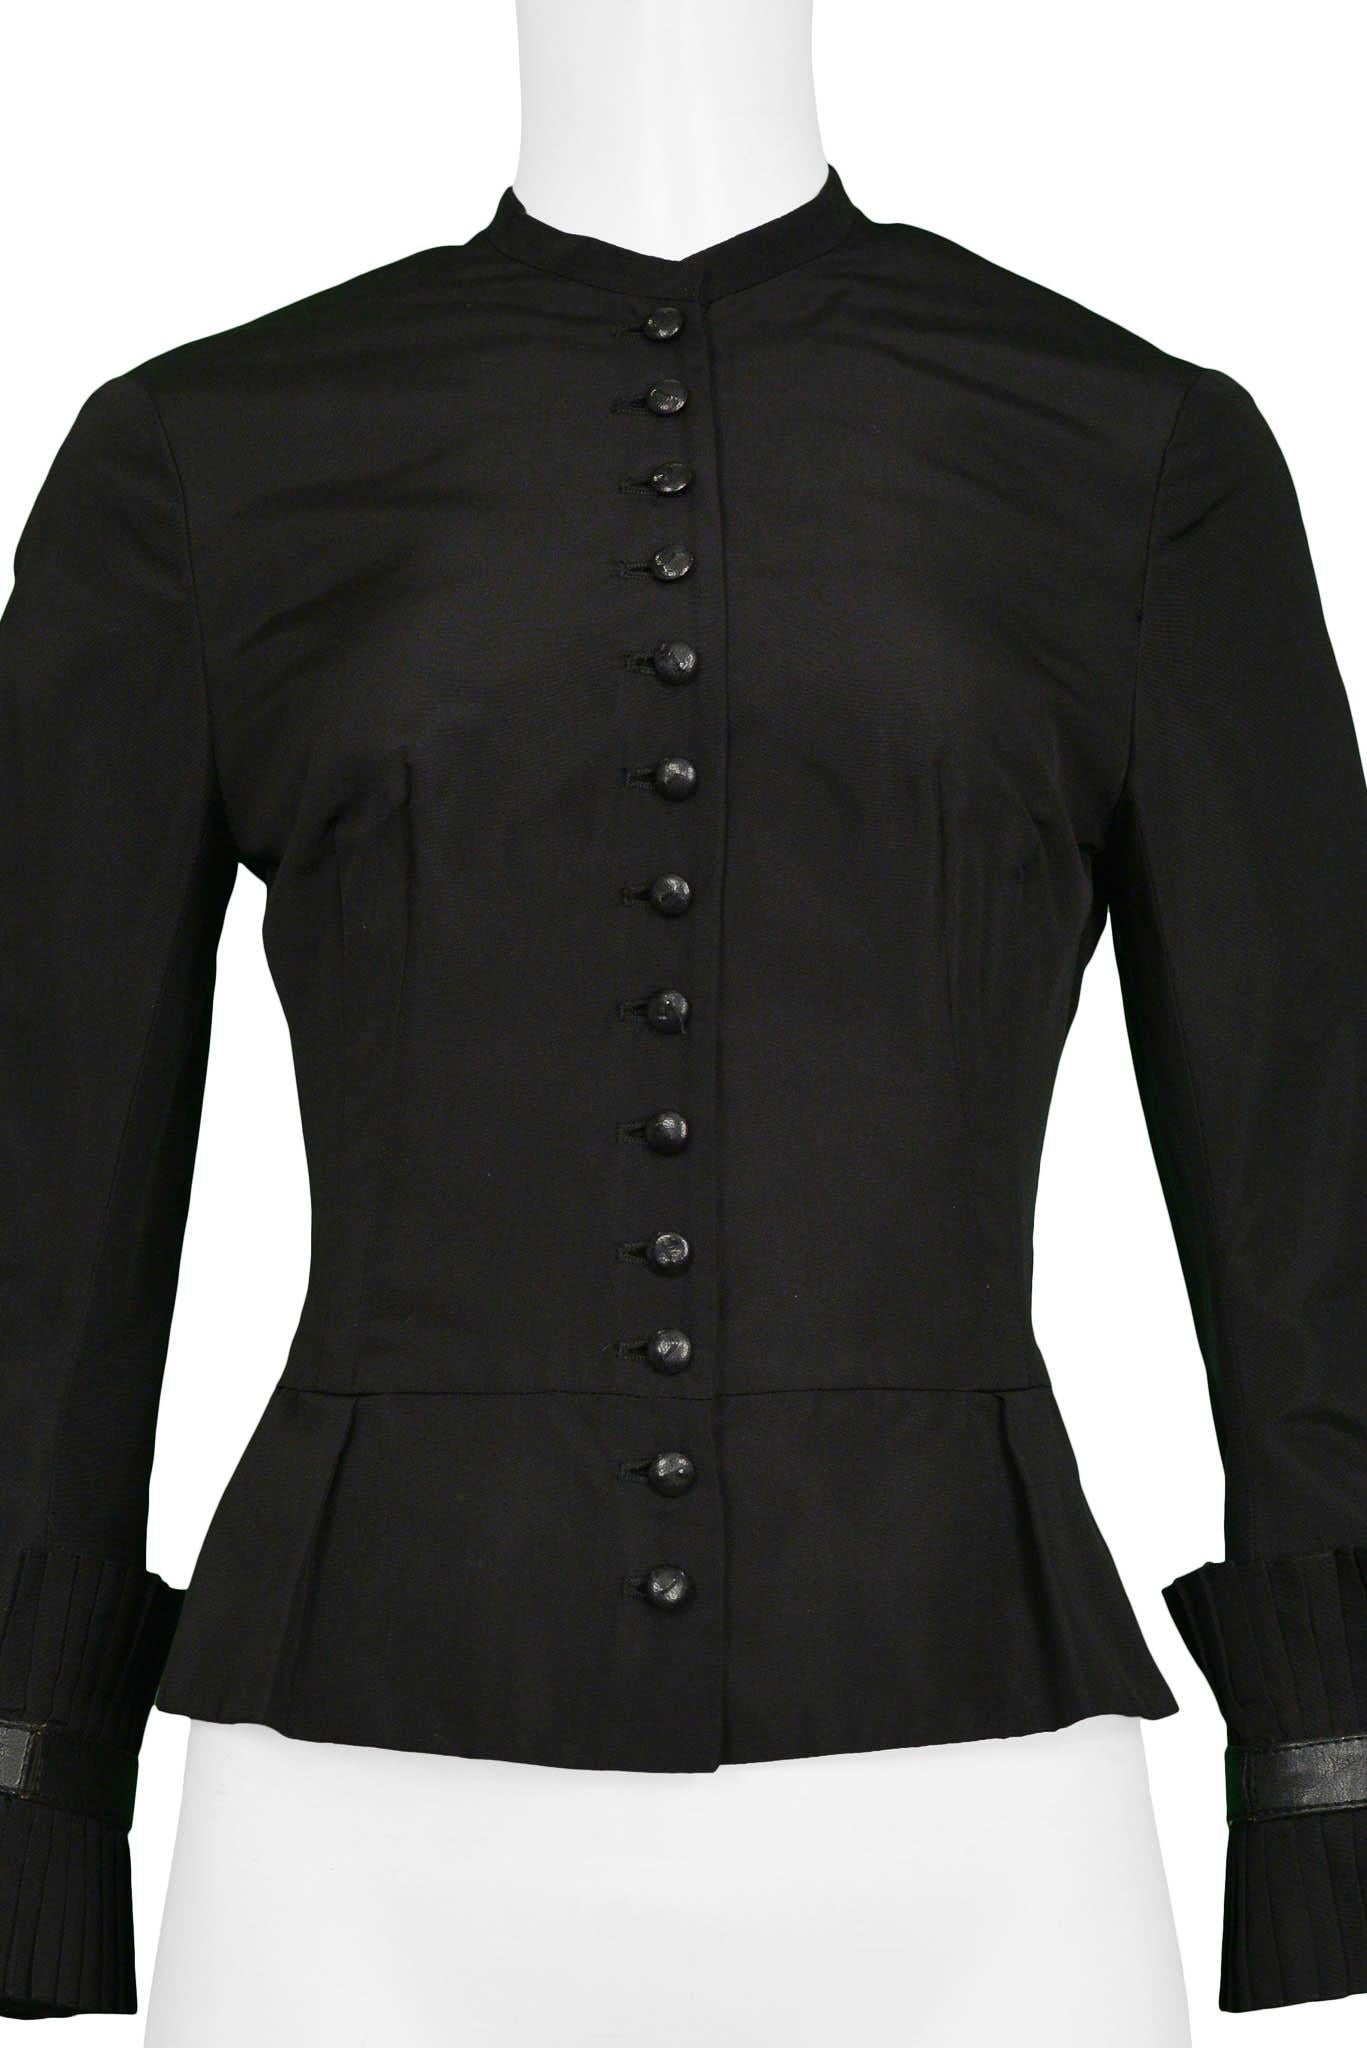 Women's Alexander Mcqueen Black taffeta Jacket With Pleated Sleeves AW 2002